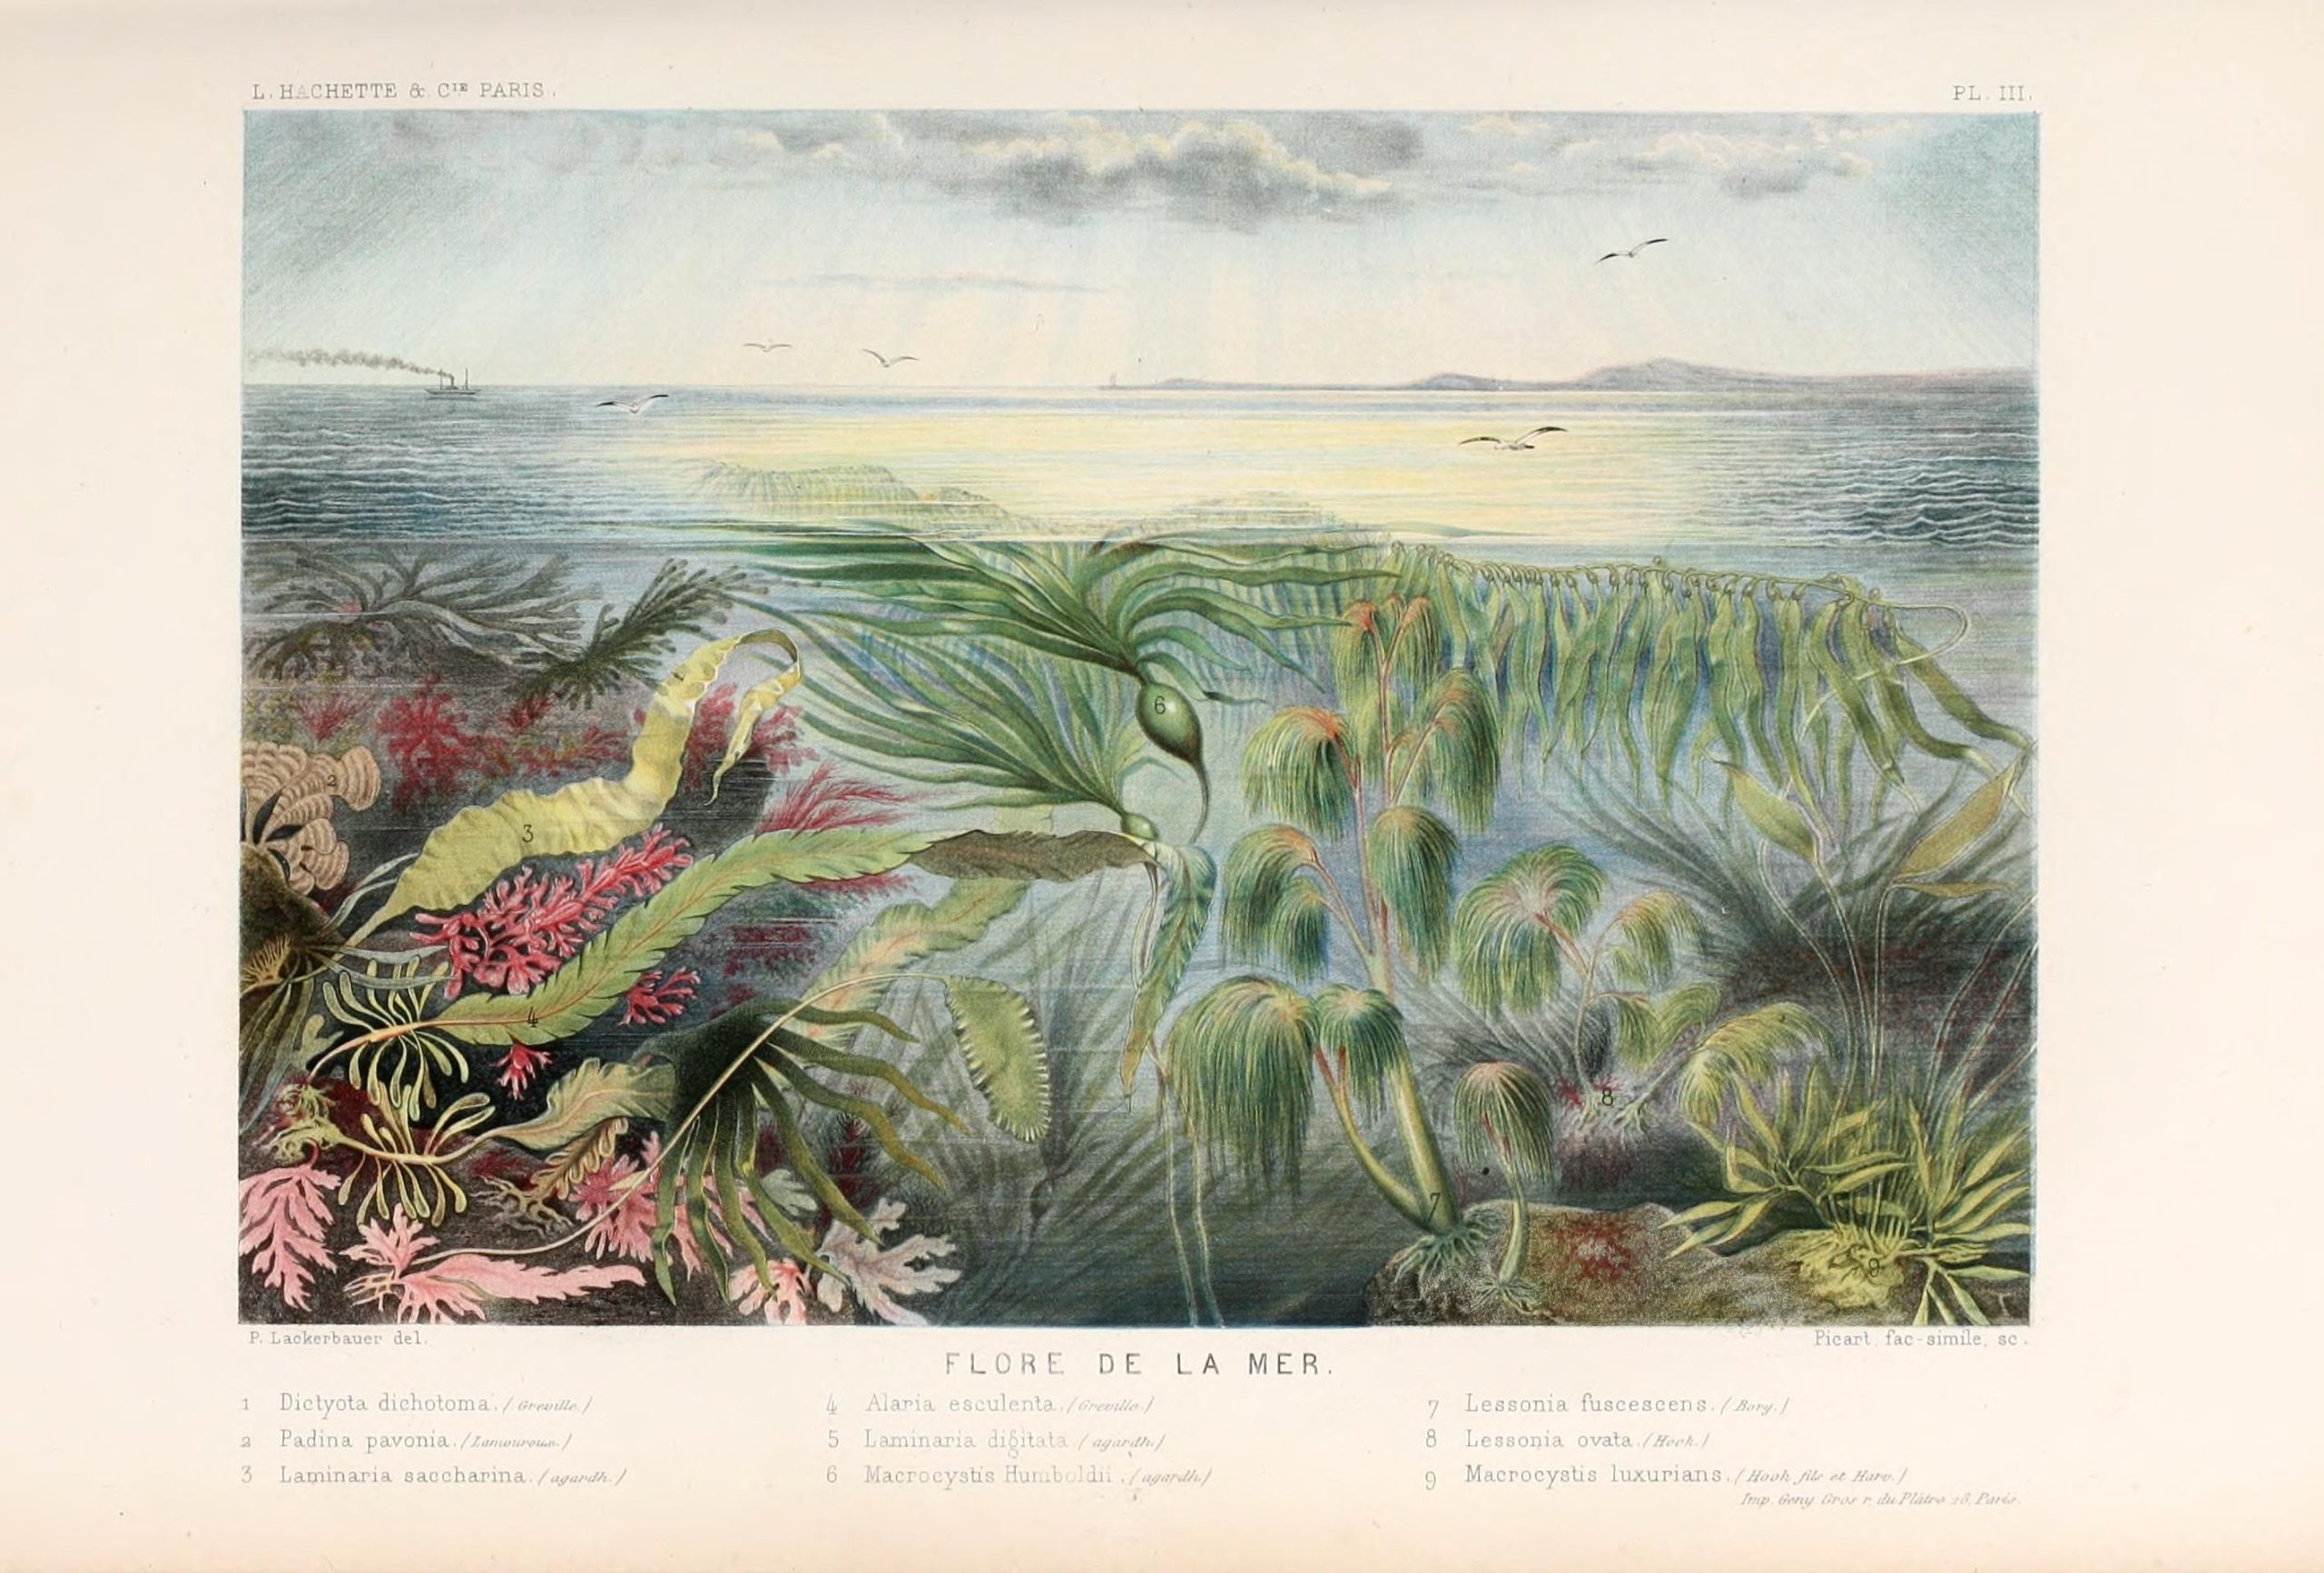 A landscape view of various sea flora in the ocean